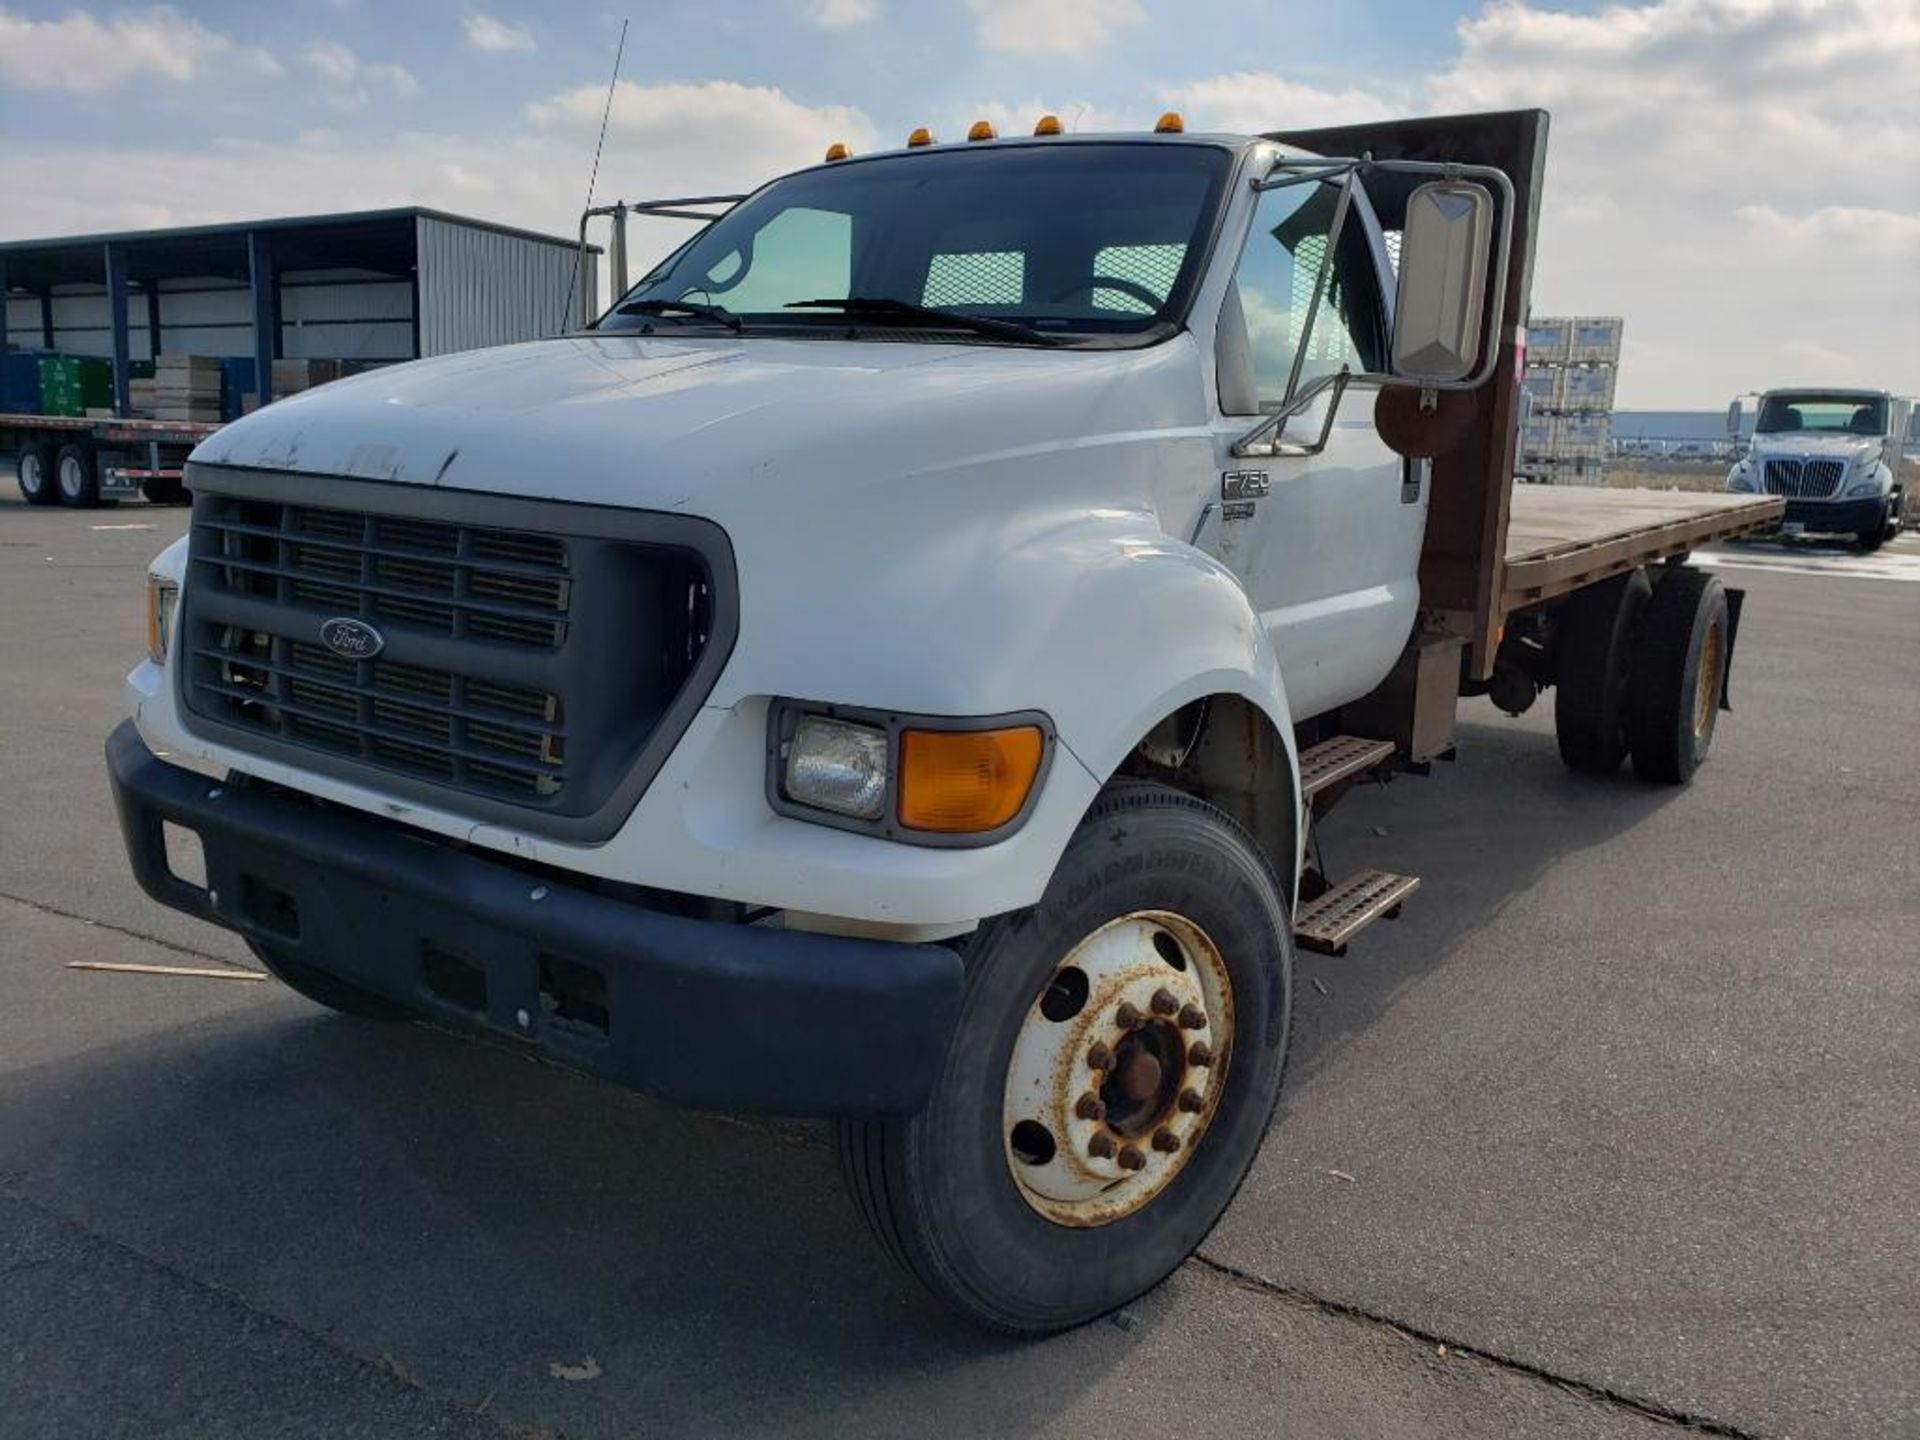 2000 Ford F-750 Truck, VIN # 3FEXF75HXYMA00737 - Image 3 of 40